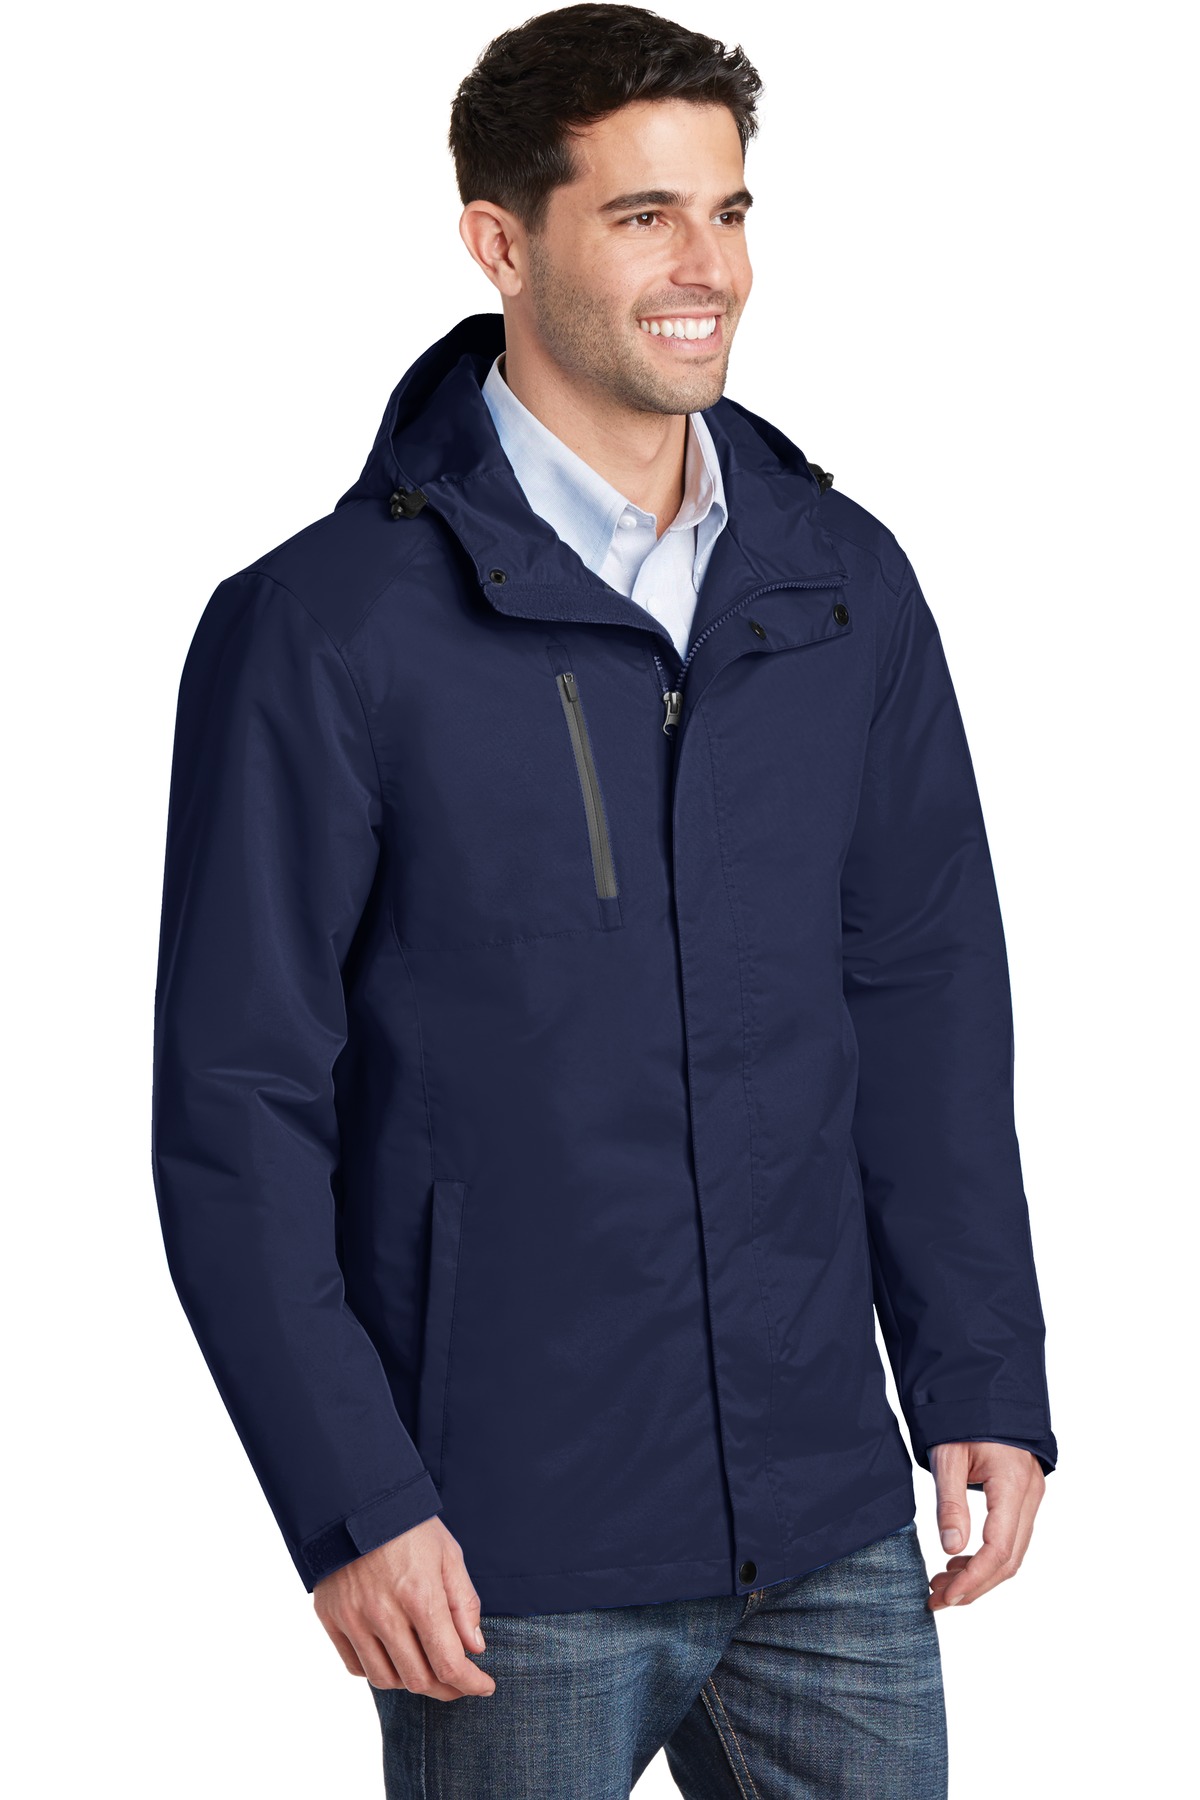 Port Authority All Conditions Jacket-M (True Navy) - image 4 of 6